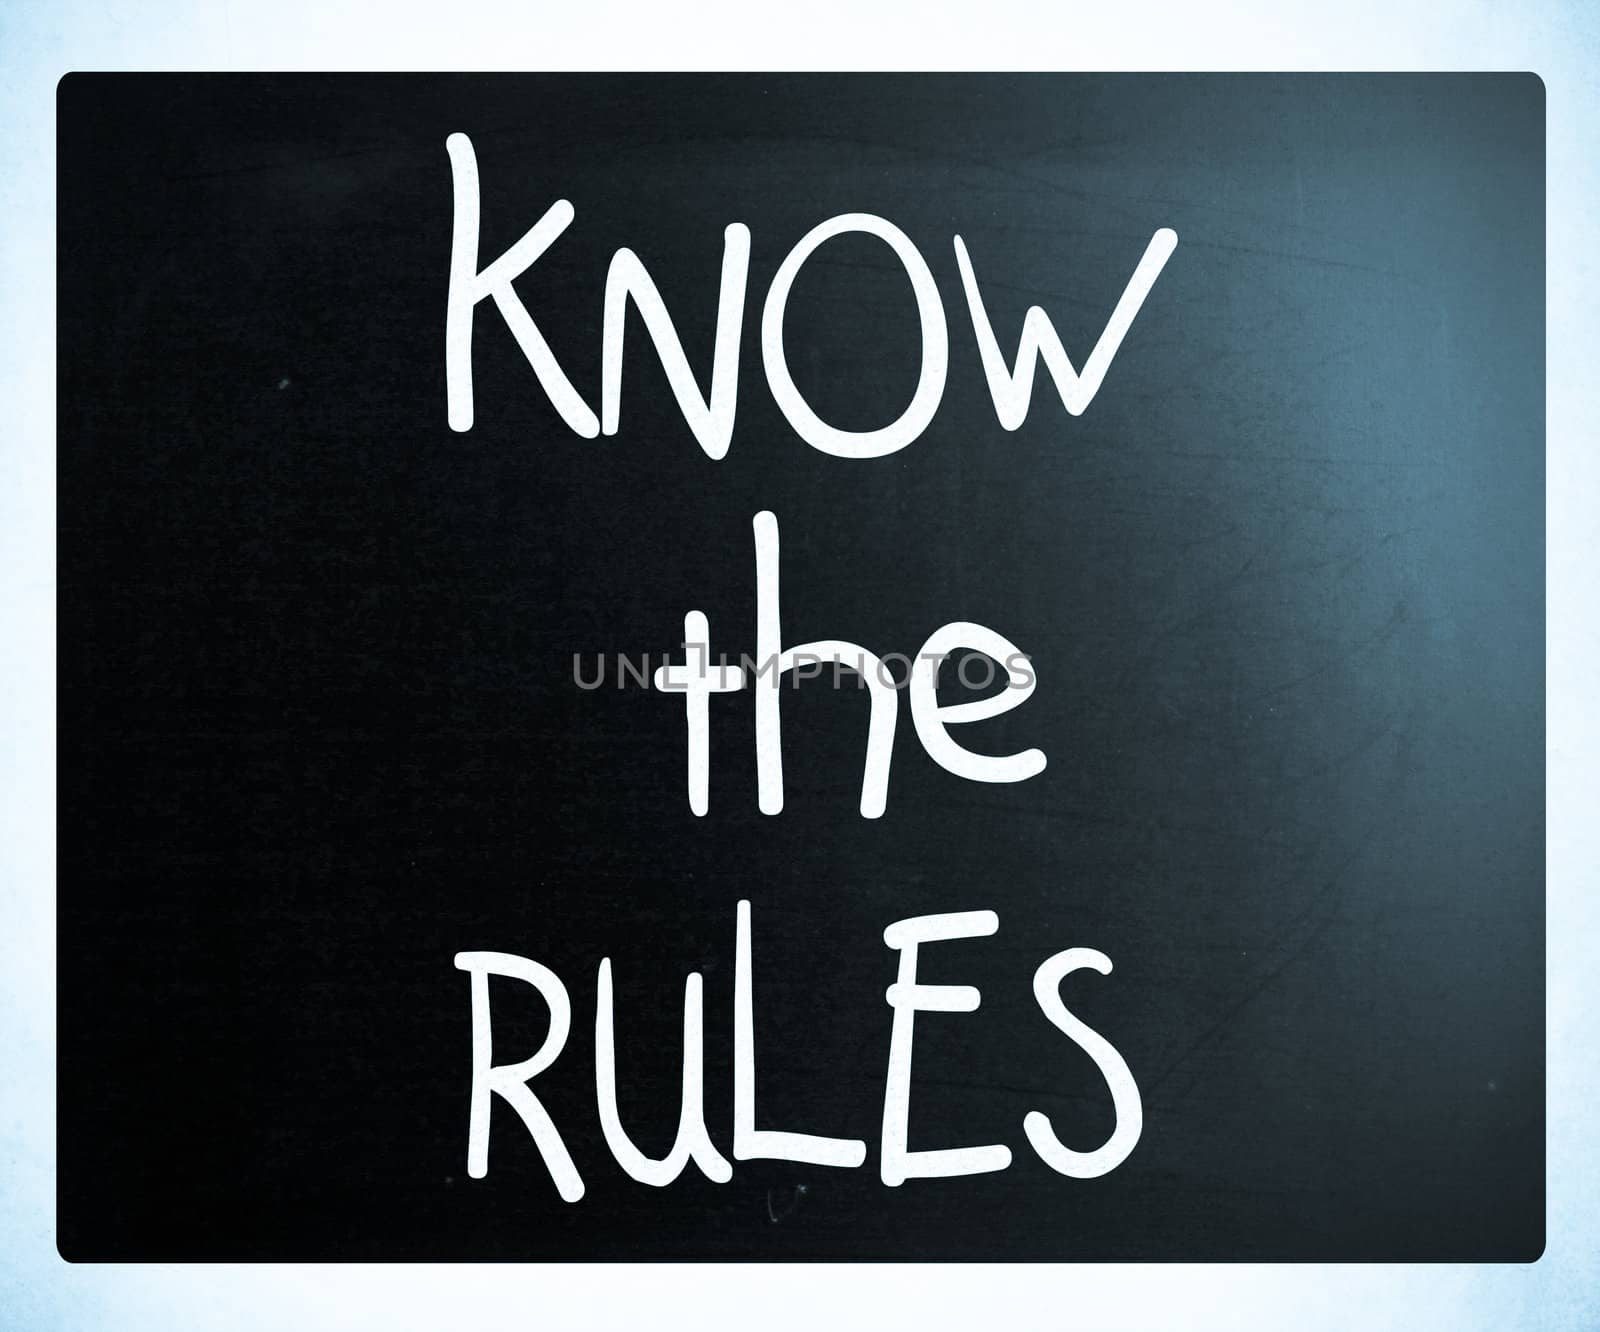 "Know the rules" handwritten with white chalk on a blackboard